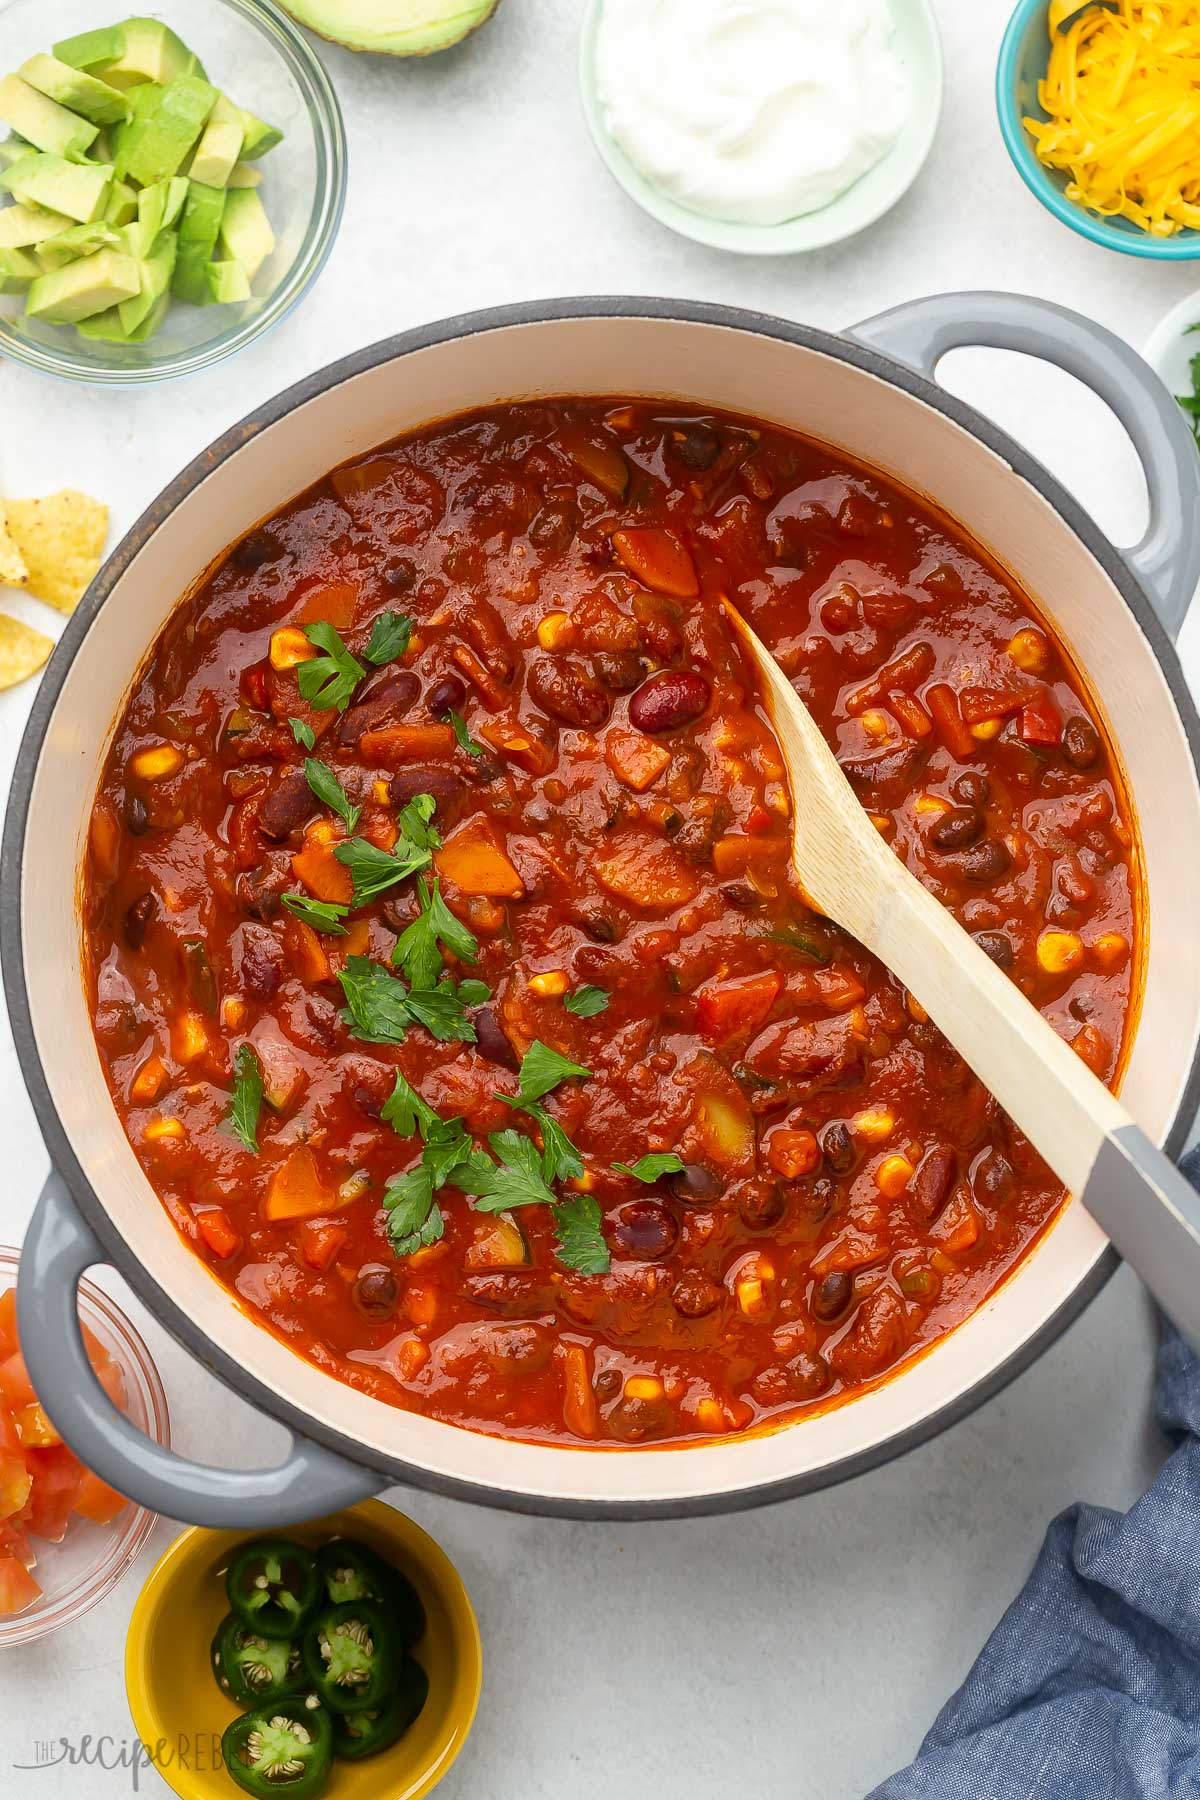 Overhead view of a large pot of vegetarian chilli with wooden ladle and toppings.